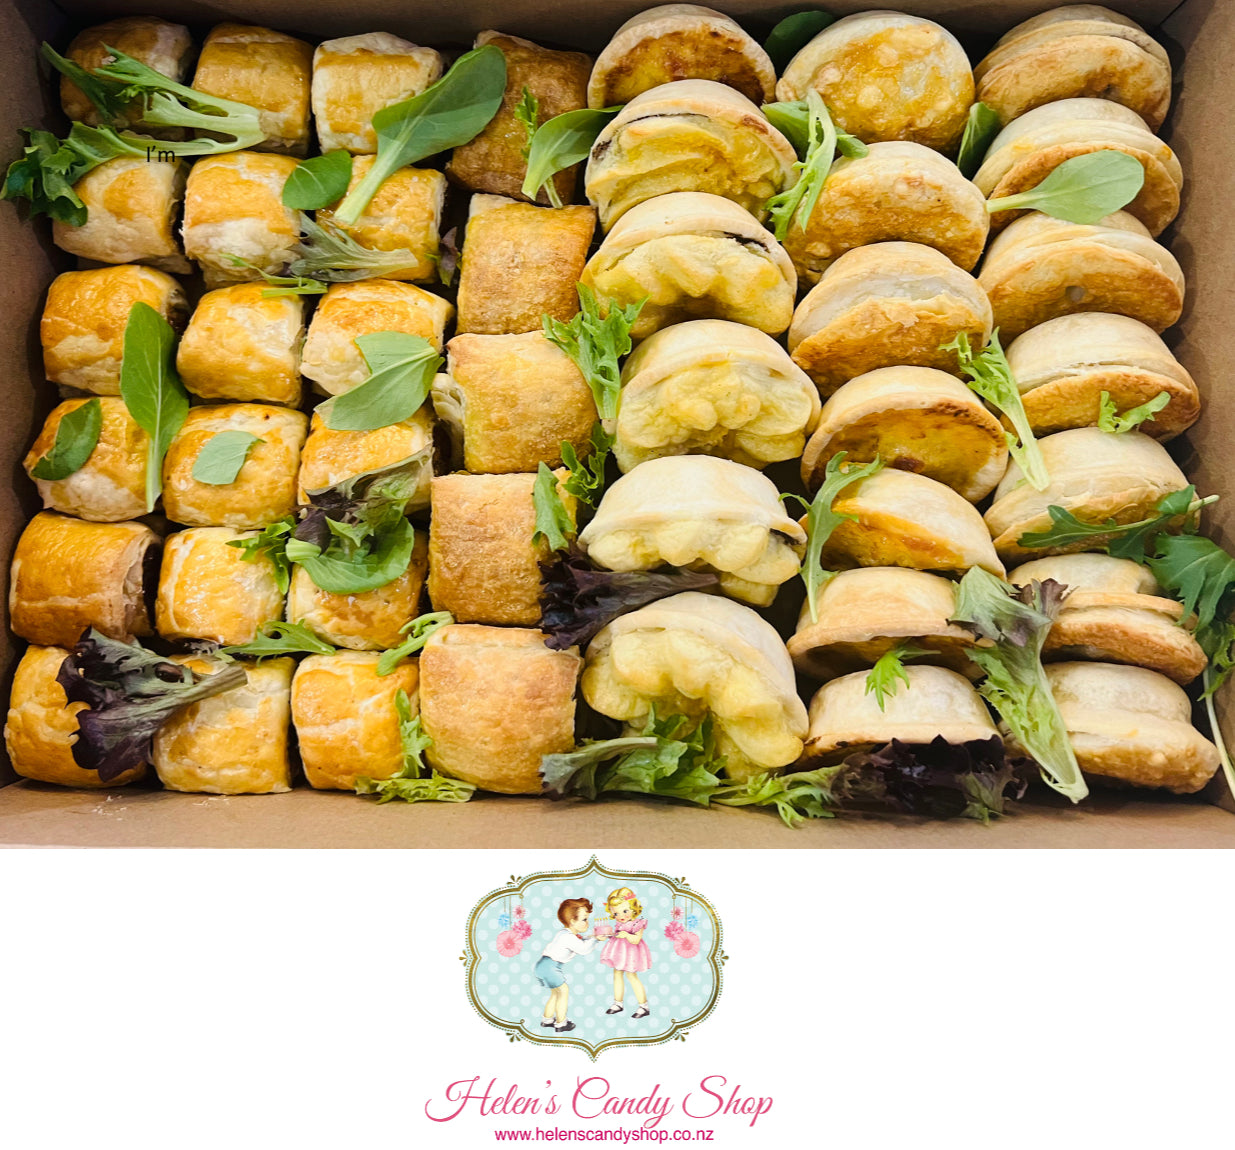 Mini Pastry & Sausage Roll Platter